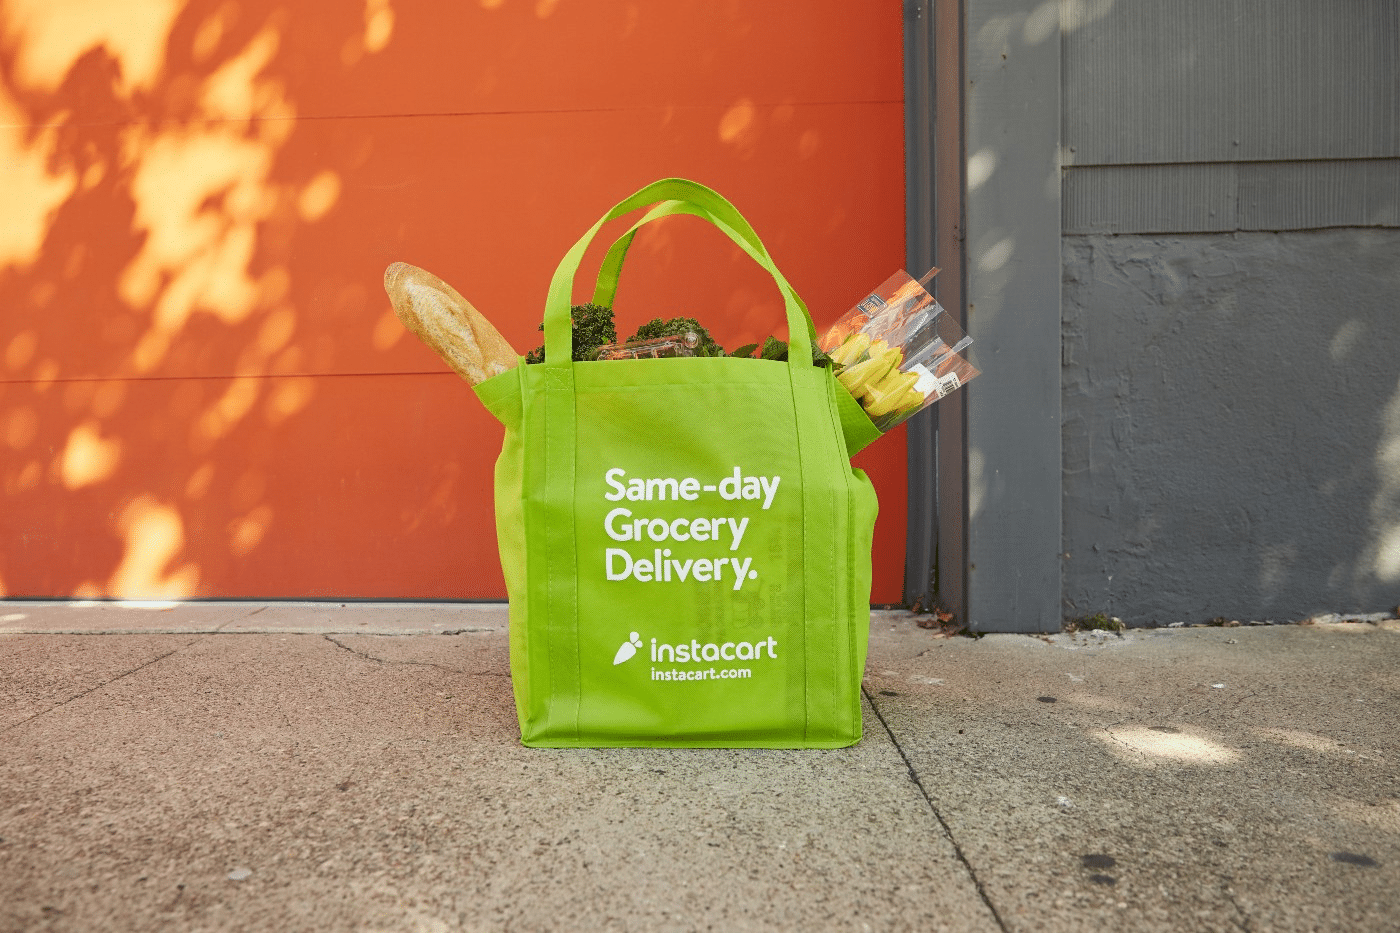 Instacart partners with Staples